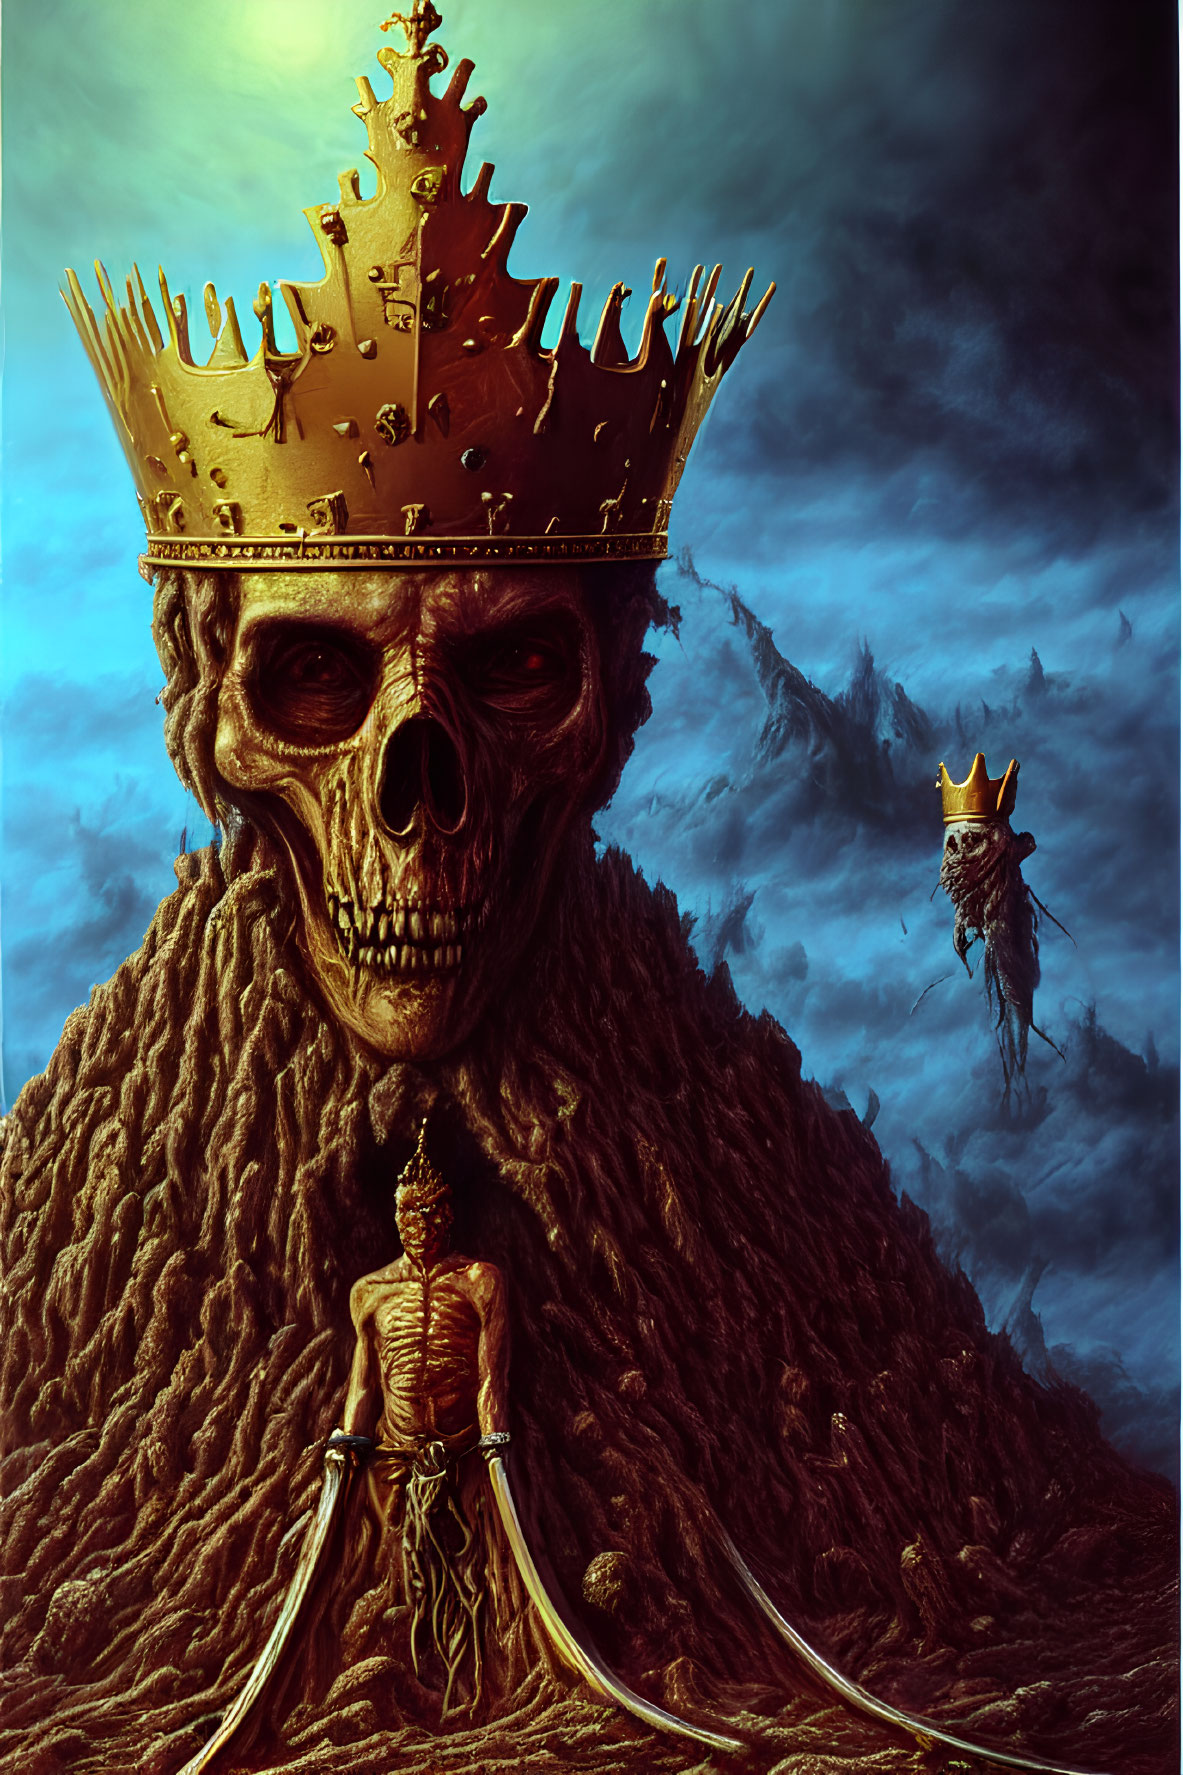 Skeletal figure with crown on throne, smaller crowned figure in dramatic sky